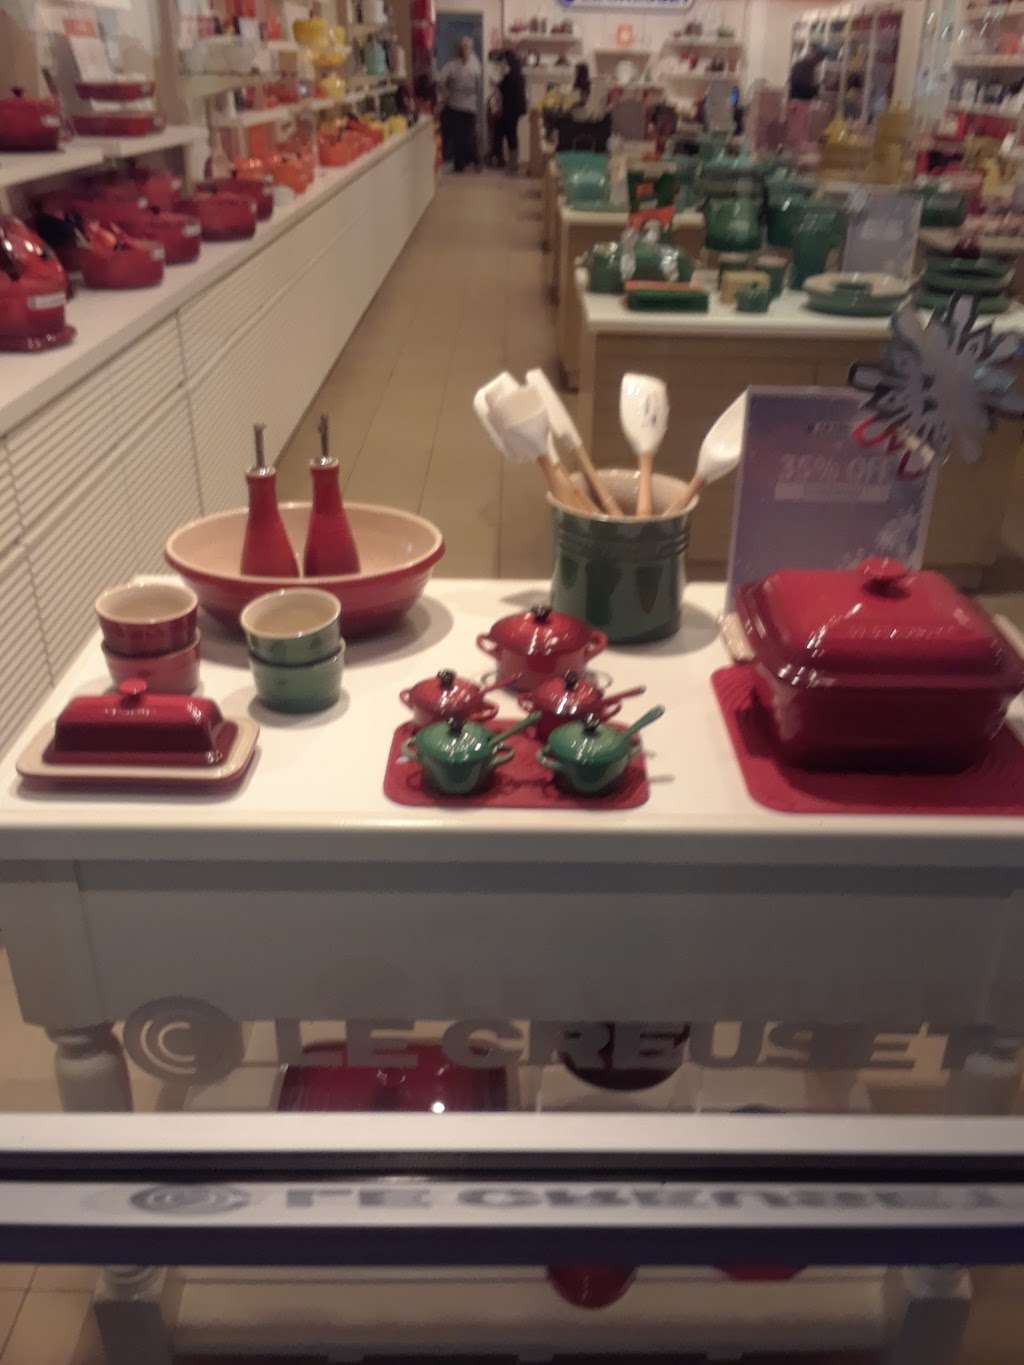 Le Creuset Outlet Store | 6800 N 95th Ave #818, Glendale, AZ 85305, USA | Phone: (623) 872-5377